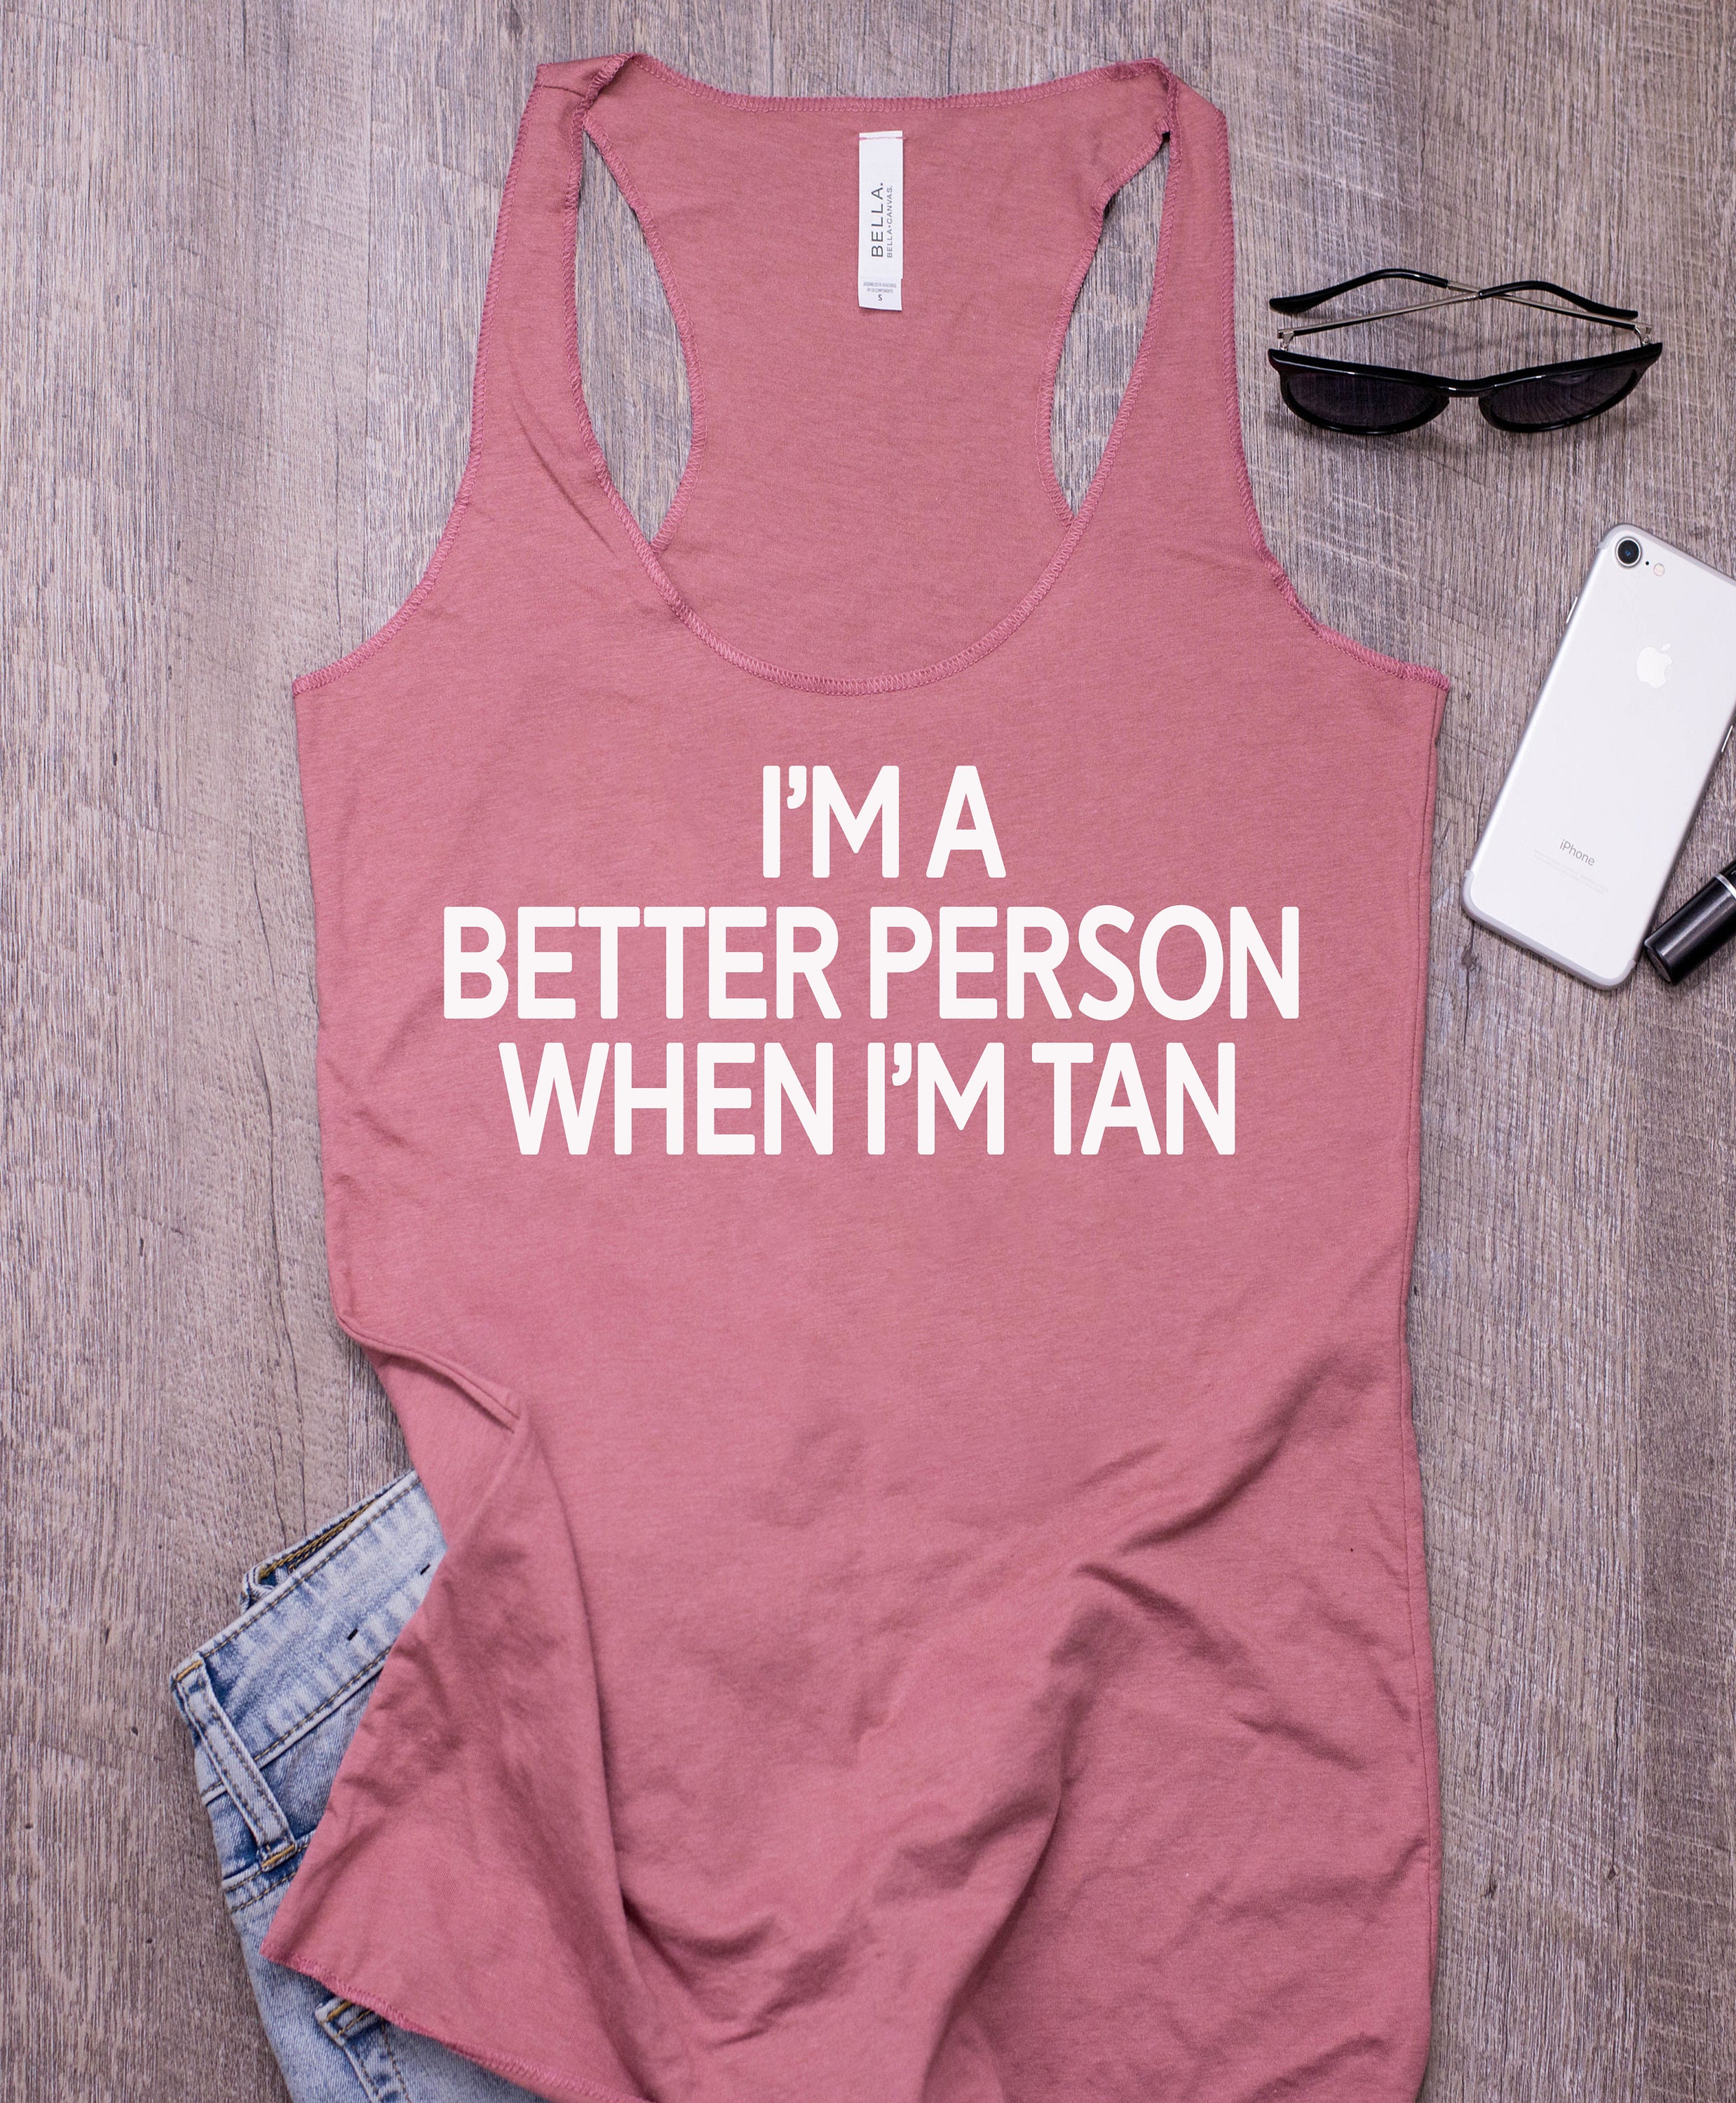 I'm A Better Person When Tan Funny Womens Racerback Tank - Beach Top Vacation Tank Cruise Ship Tanks Free Shipping